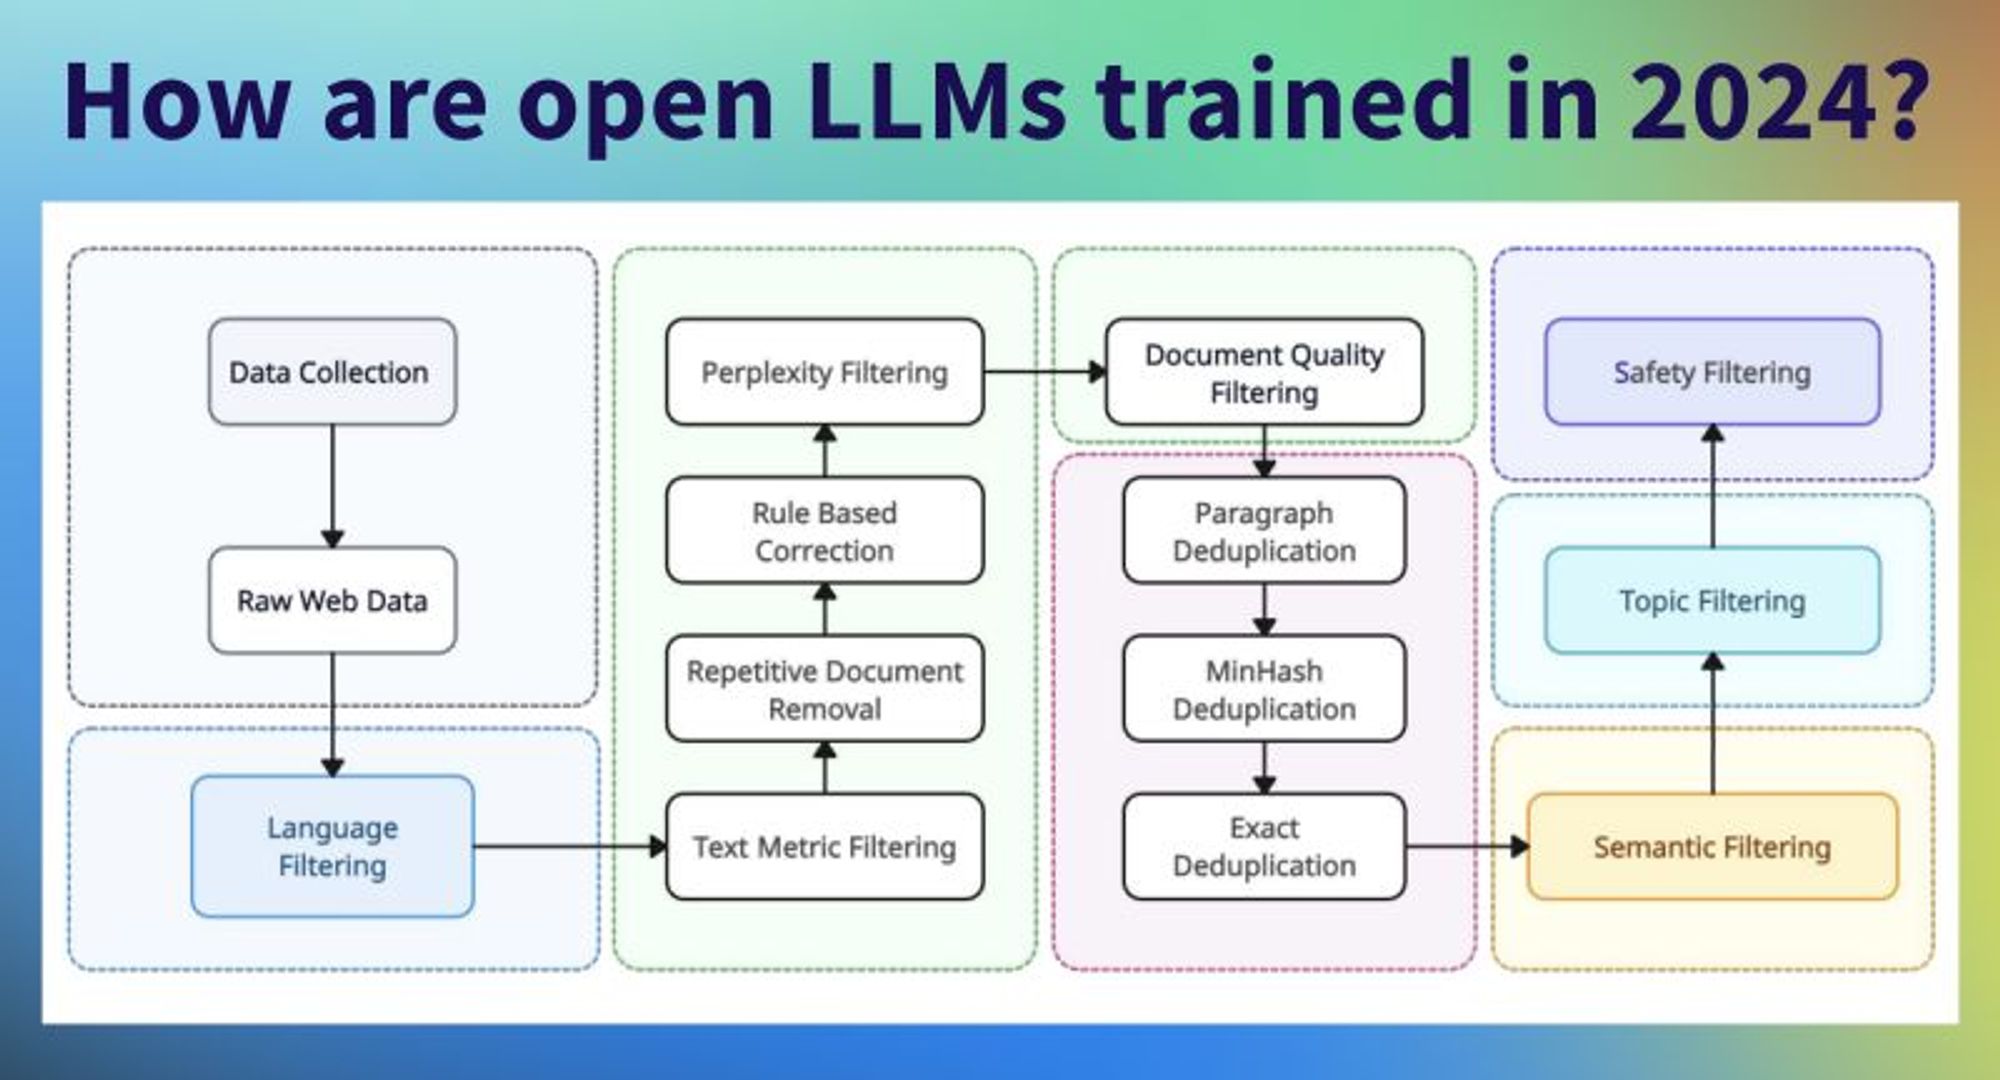 Philipp Schmid on LinkedIn: How are open LLMs trained and created in 2024? 🤔 01.AI just released… | 18 comments